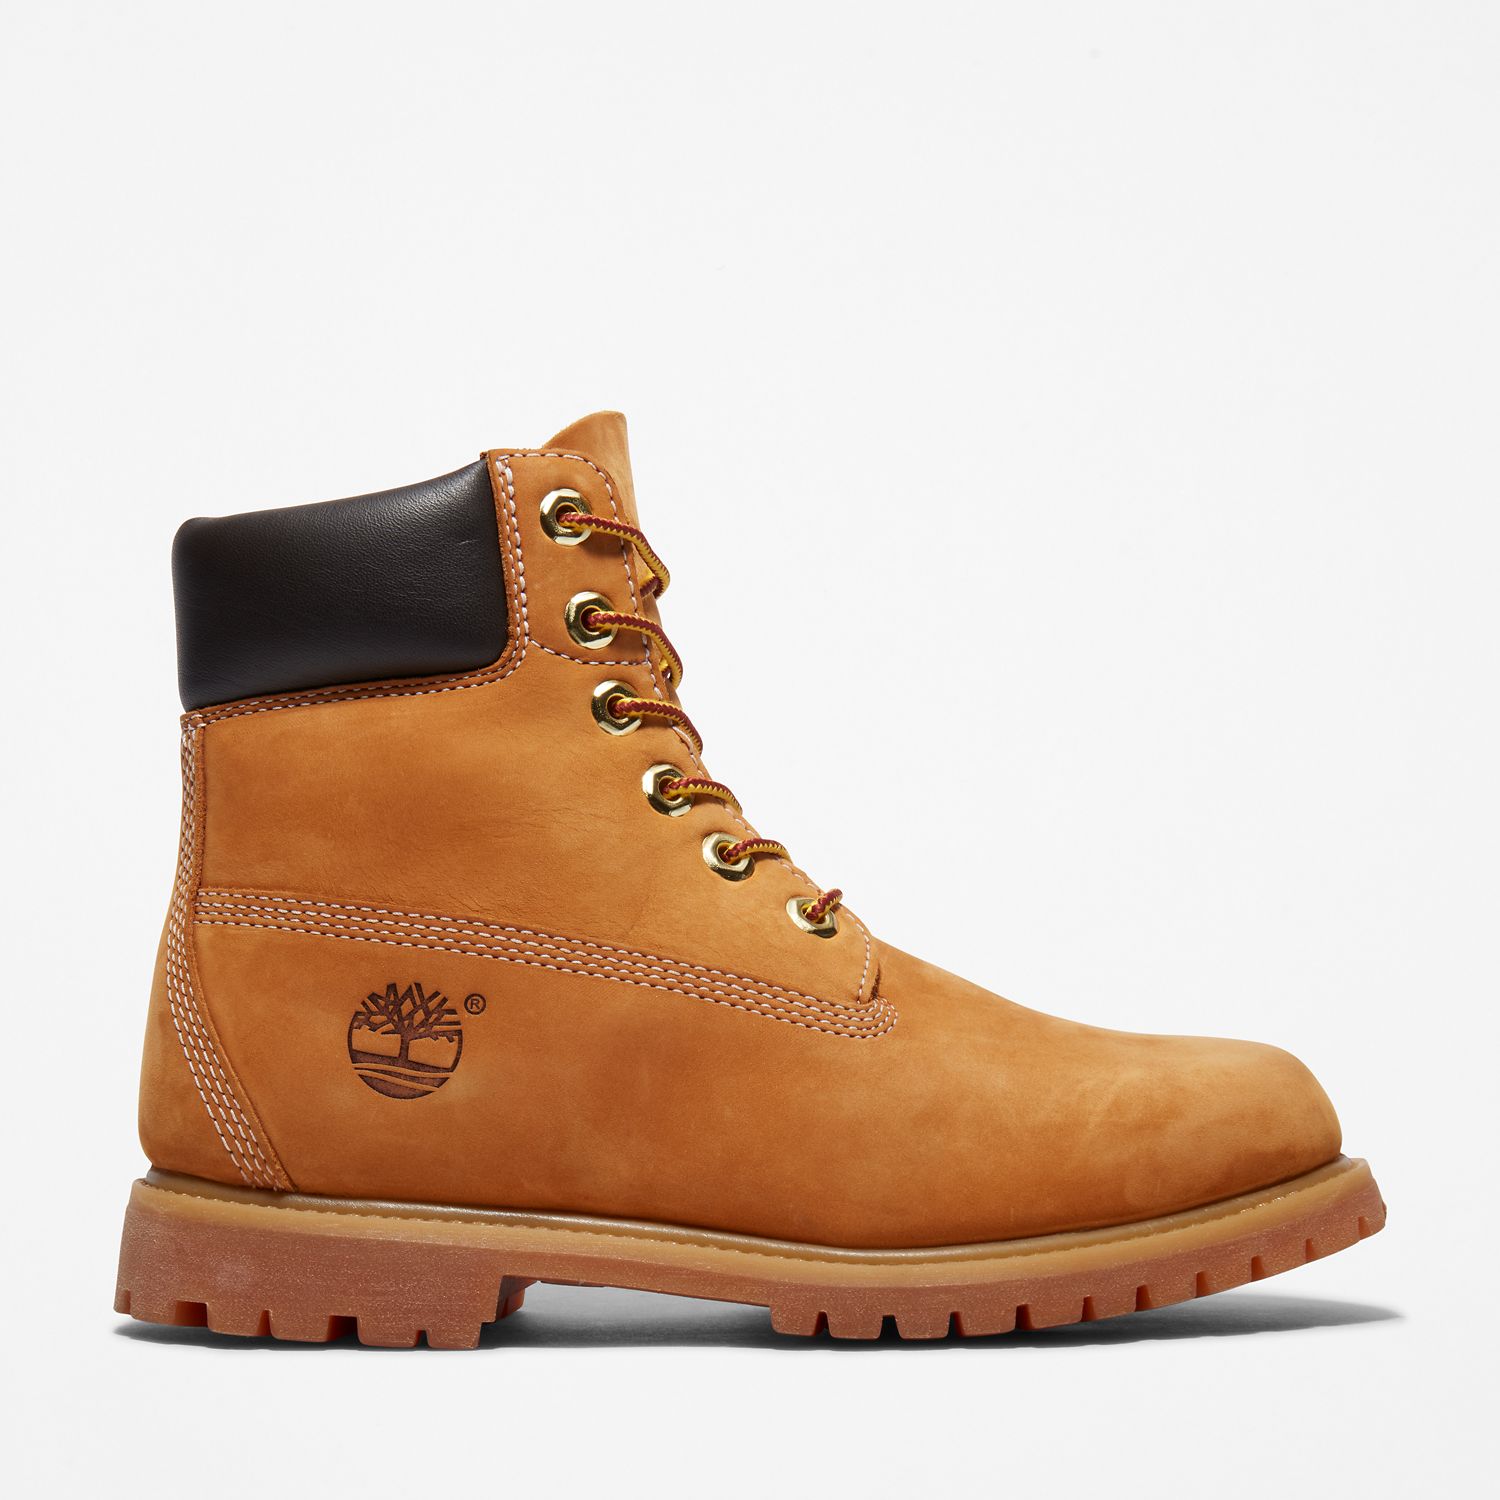 Unlock Wilderness' choice in the Timberland Vs Columbia comparison, the Premium 6-Inch Waterproof Boots by Timberland